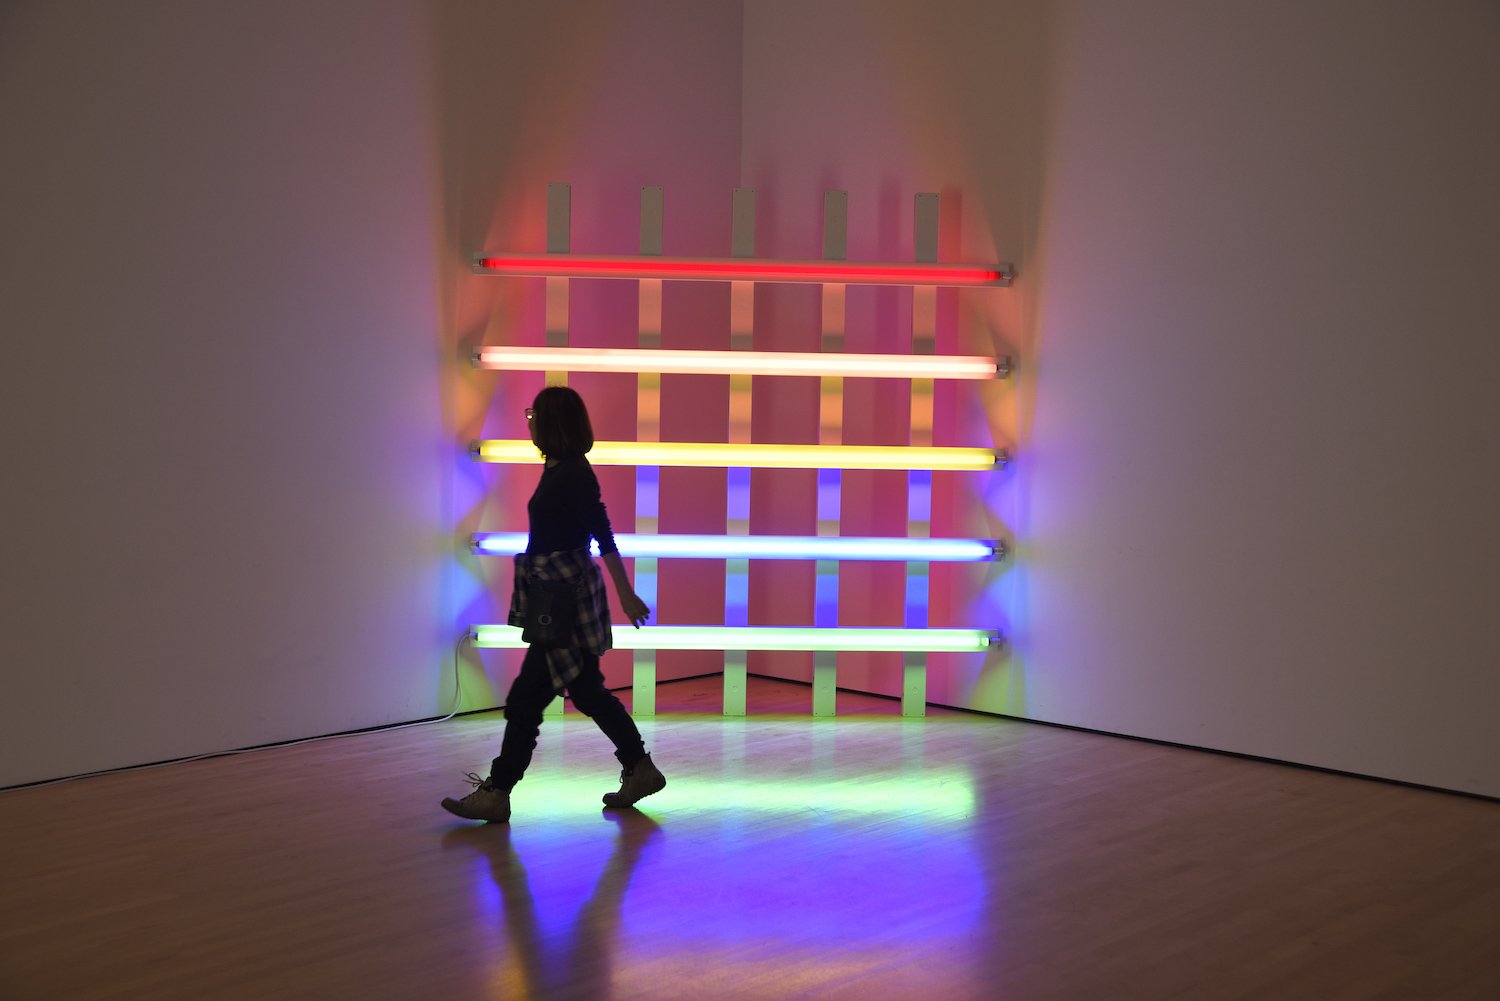 A museum visitor admires a neon sculpture by Dan Flavin at the San Francisco Museum of Modern Art in San Francisco, California